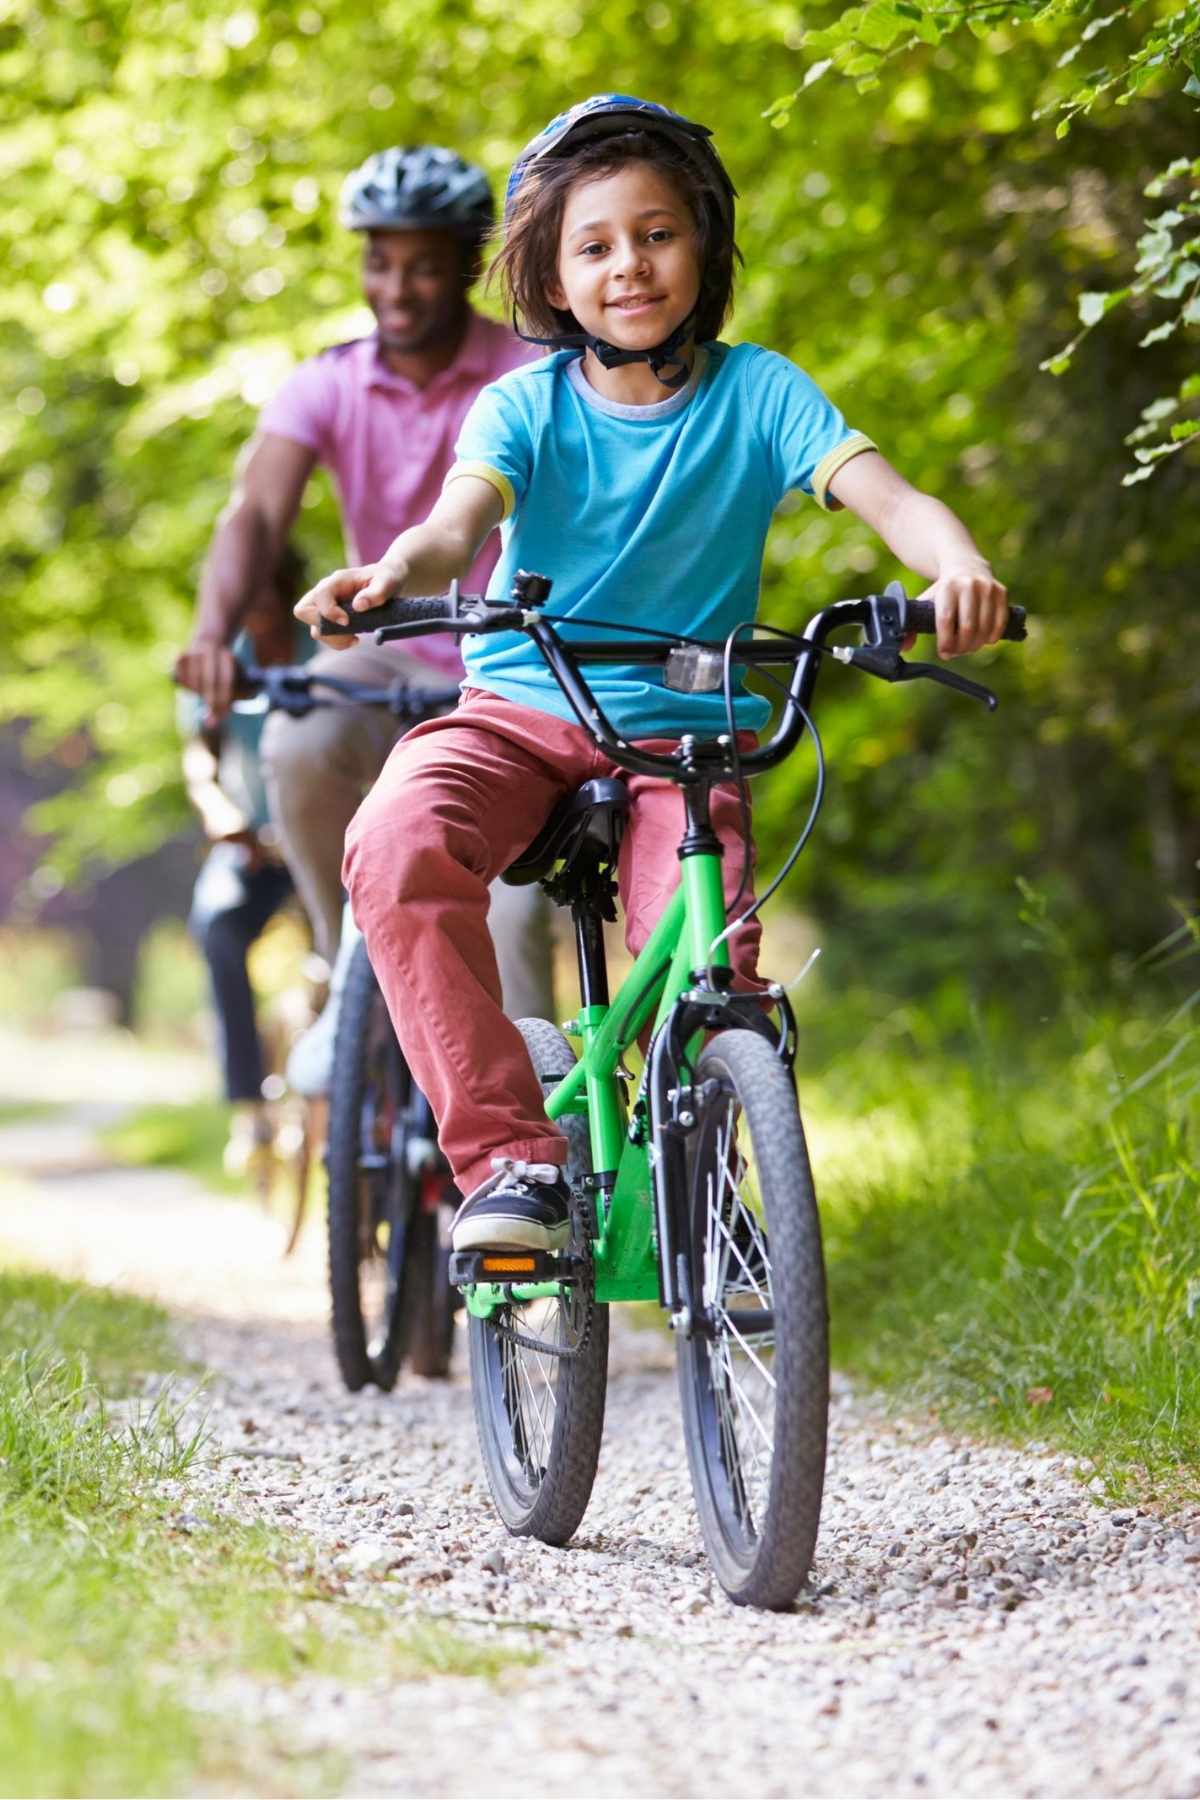 go for a family bike ride to work out with your kids